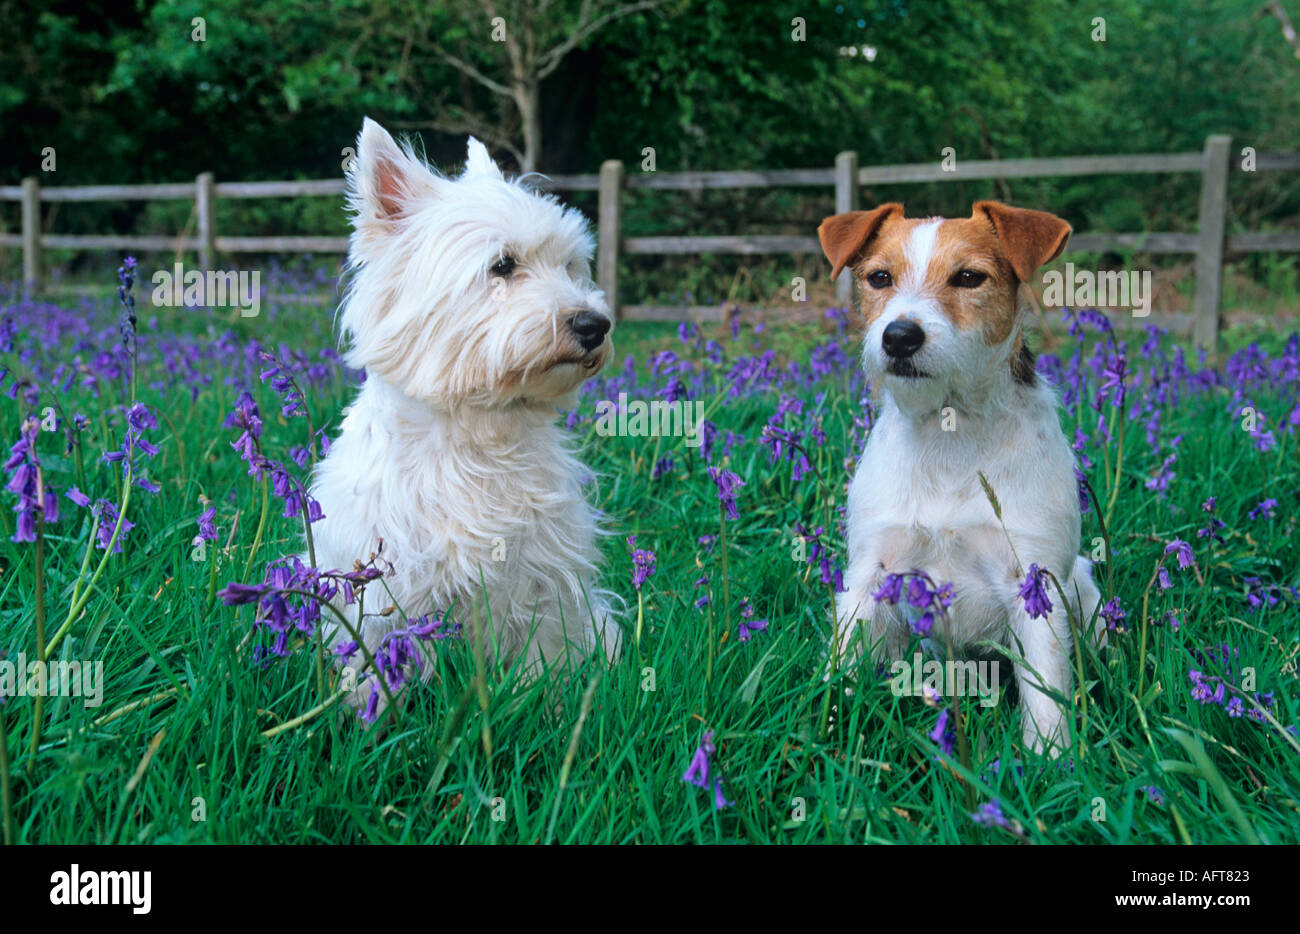 west highland white terrier jack russell terrier